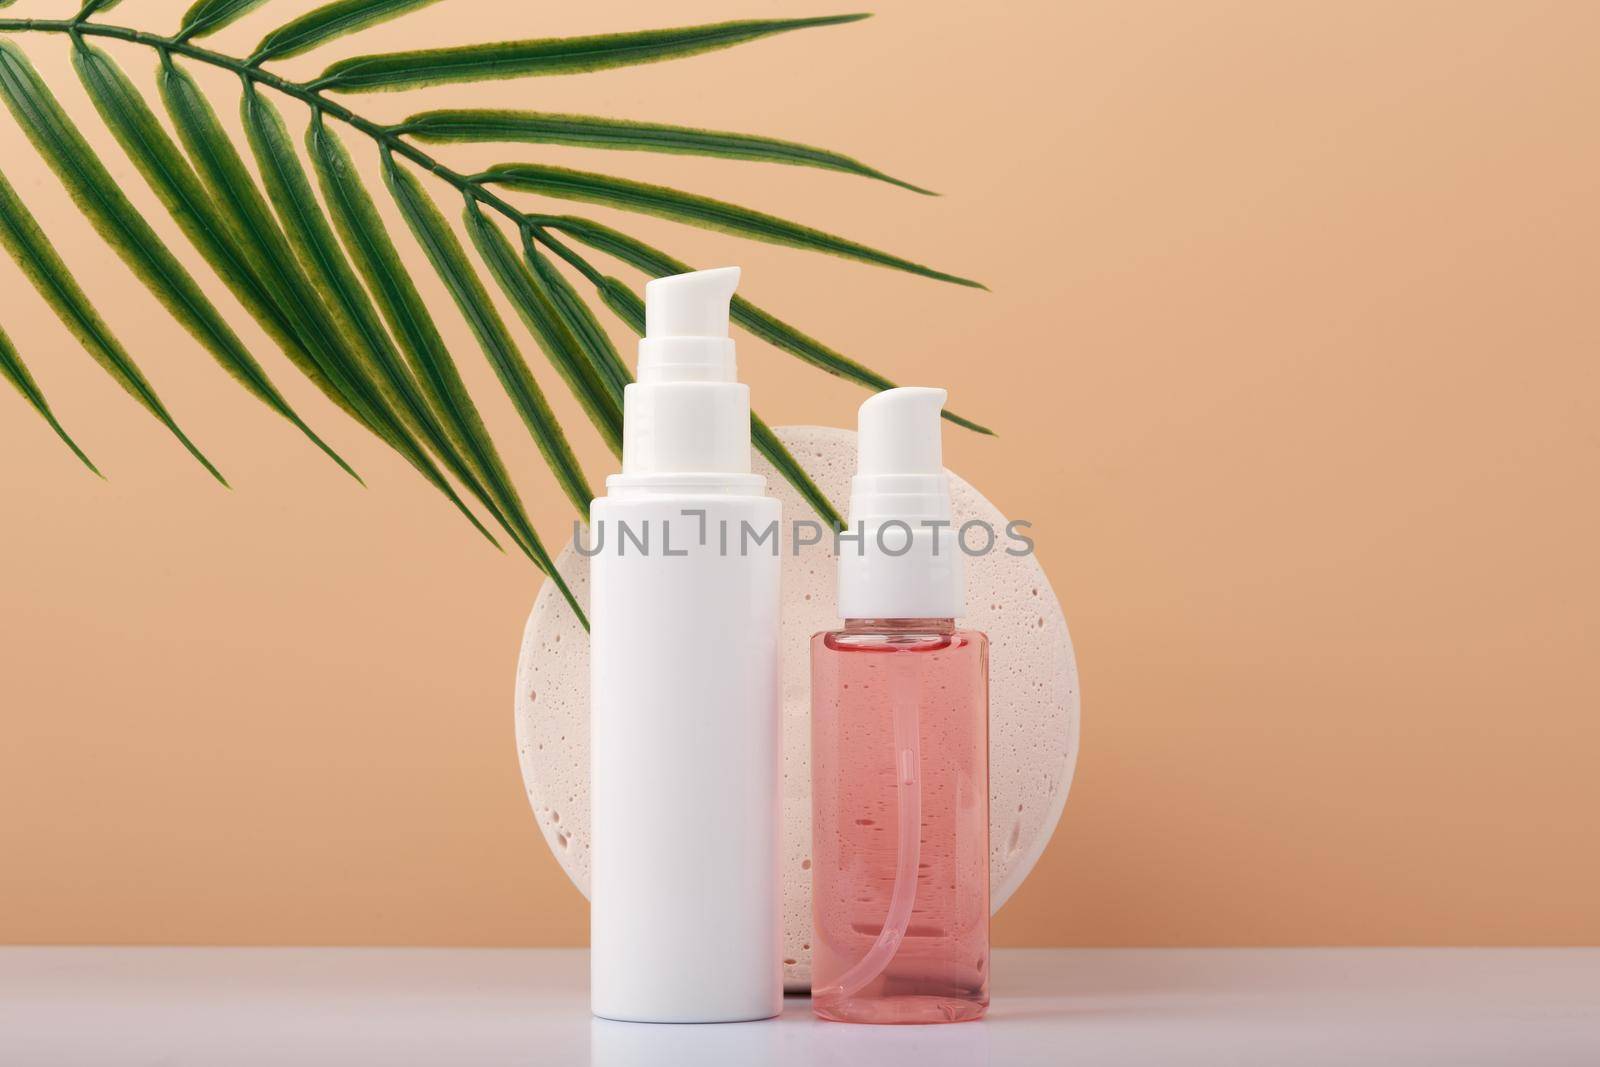 Skin care cream and cleansing foam against beige background with palm leaf. Beauty products for woman by Senorina_Irina